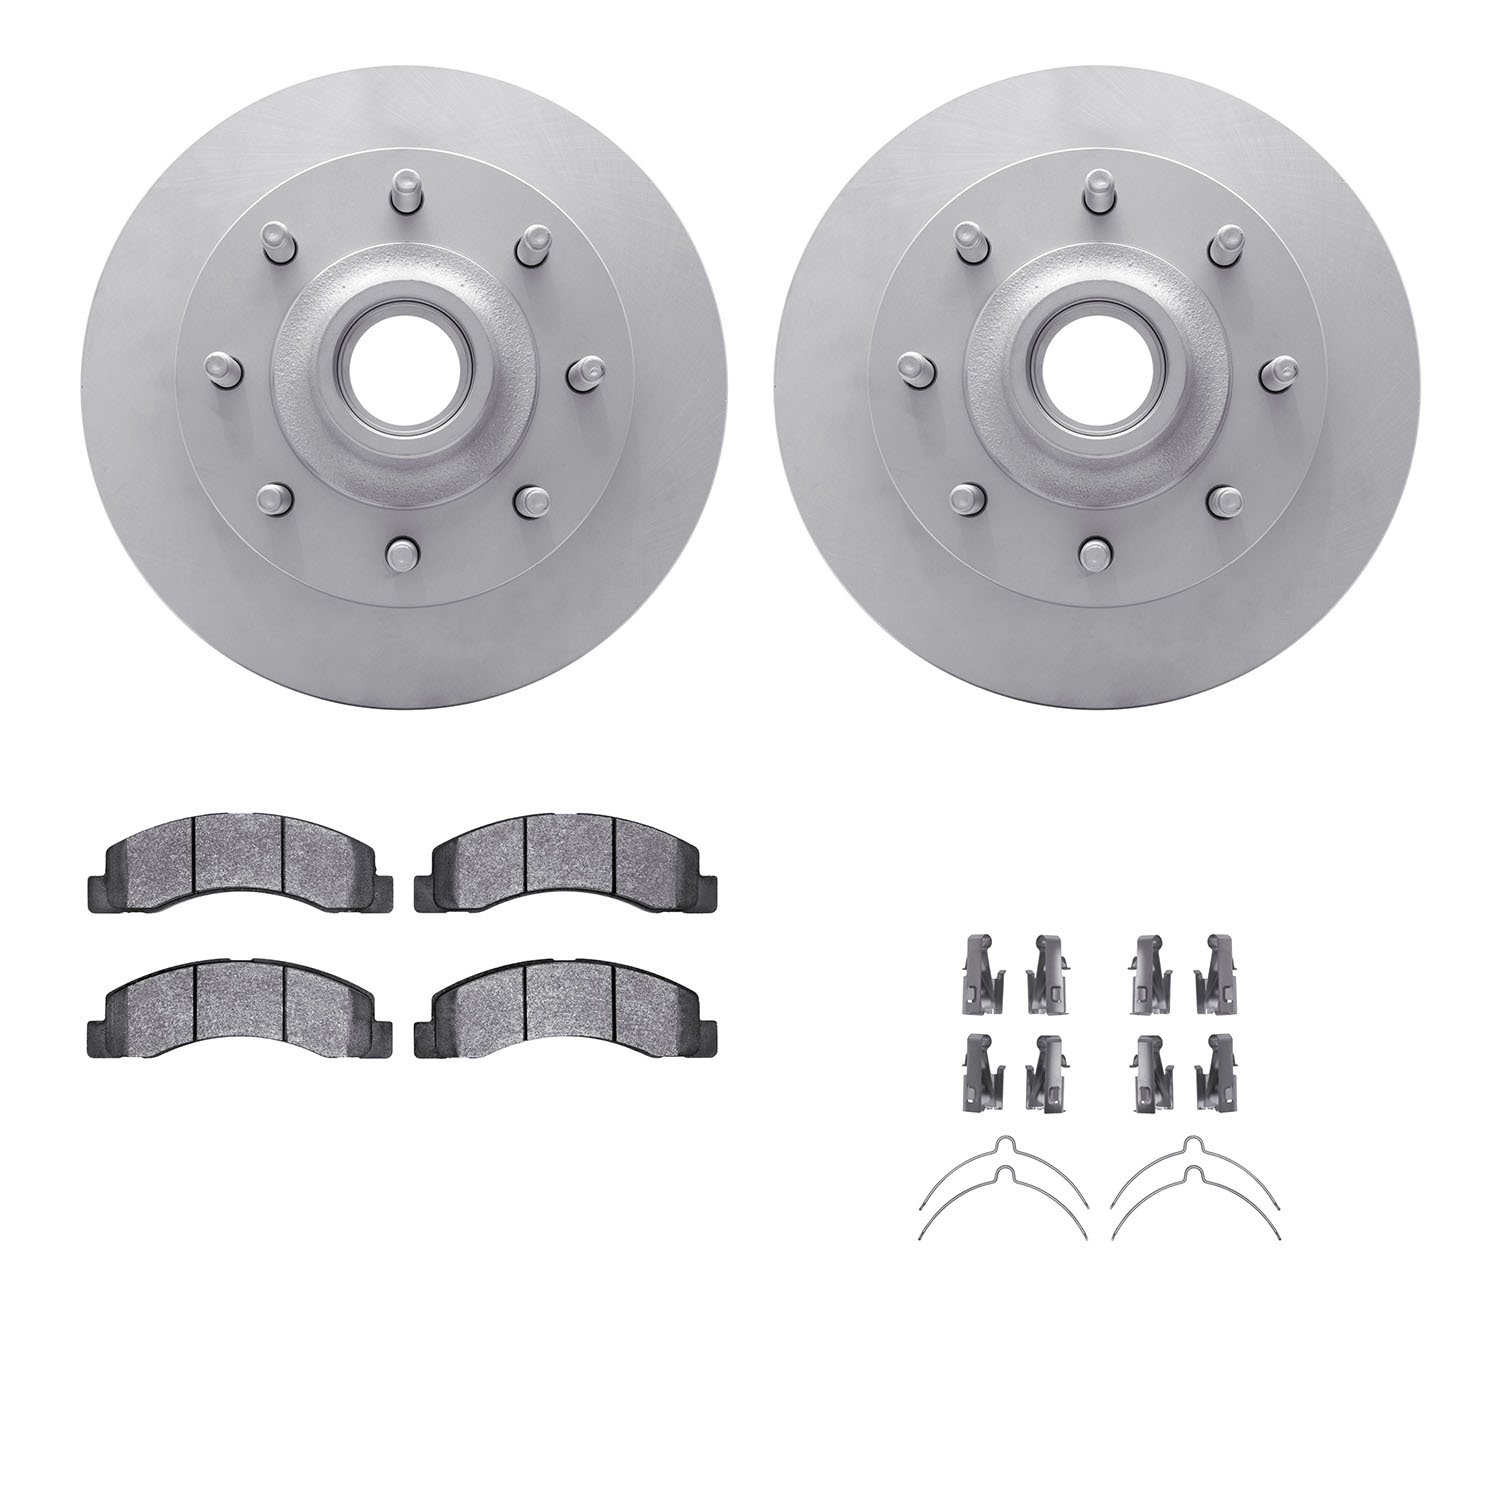 4412-54025 Geospec Brake Rotors with Ultimate-Duty Brake Pads & Hardware, 1999-2002 Ford/Lincoln/Mercury/Mazda, Position: Front